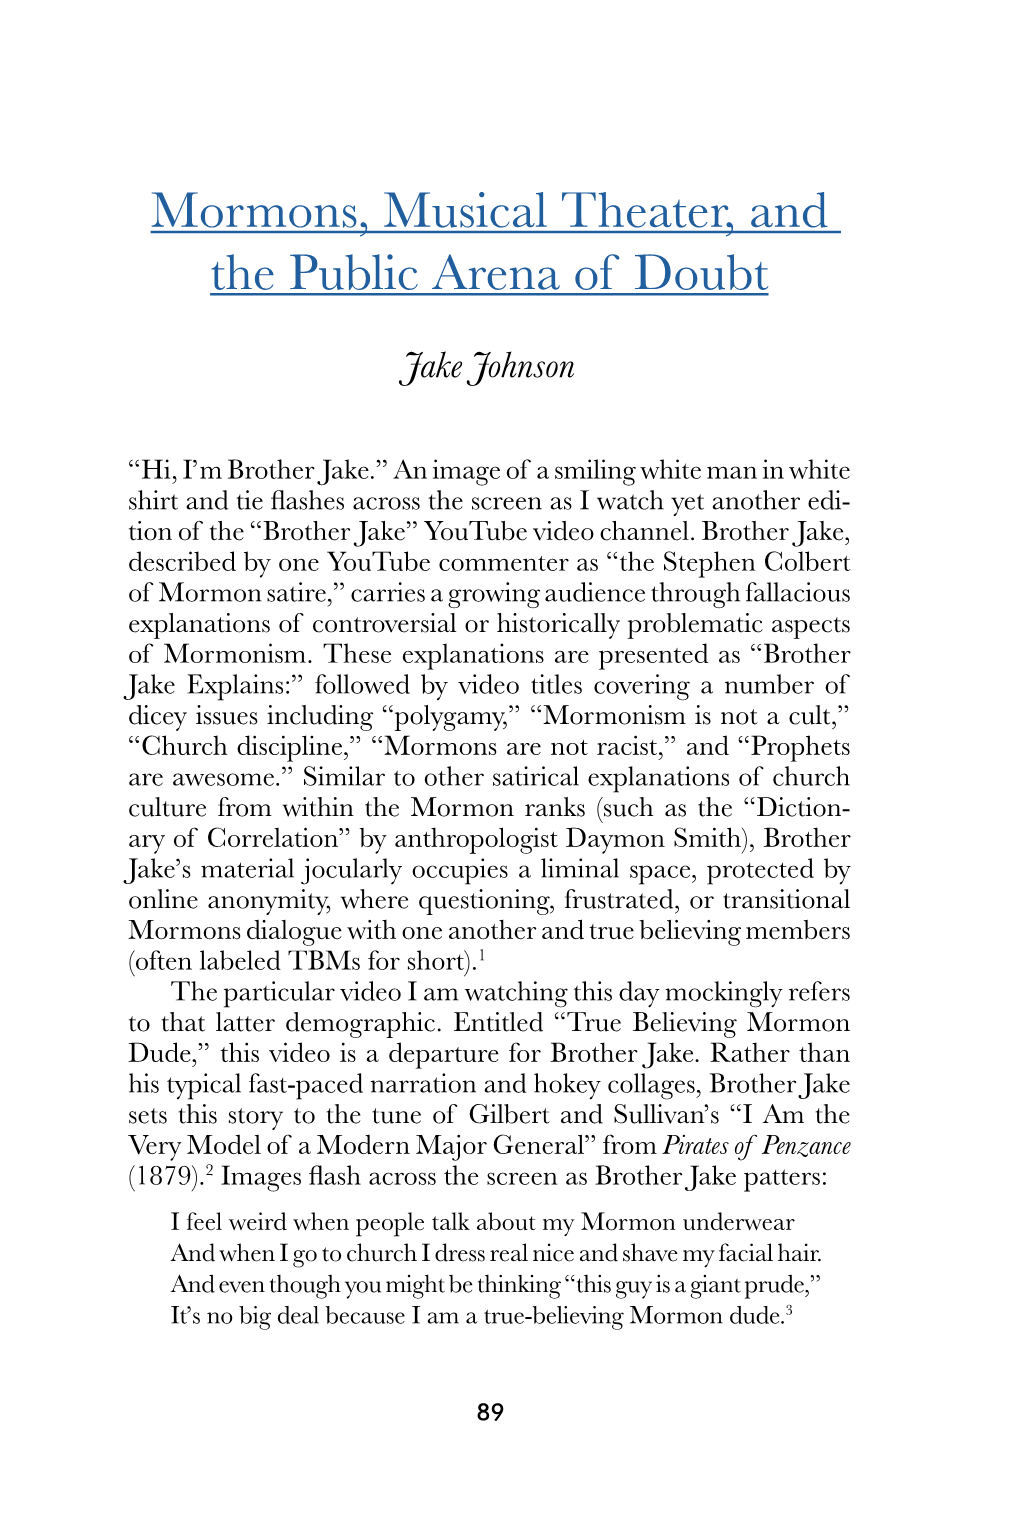 Mormons, Musical Theater, and the Public Arena of Doubt